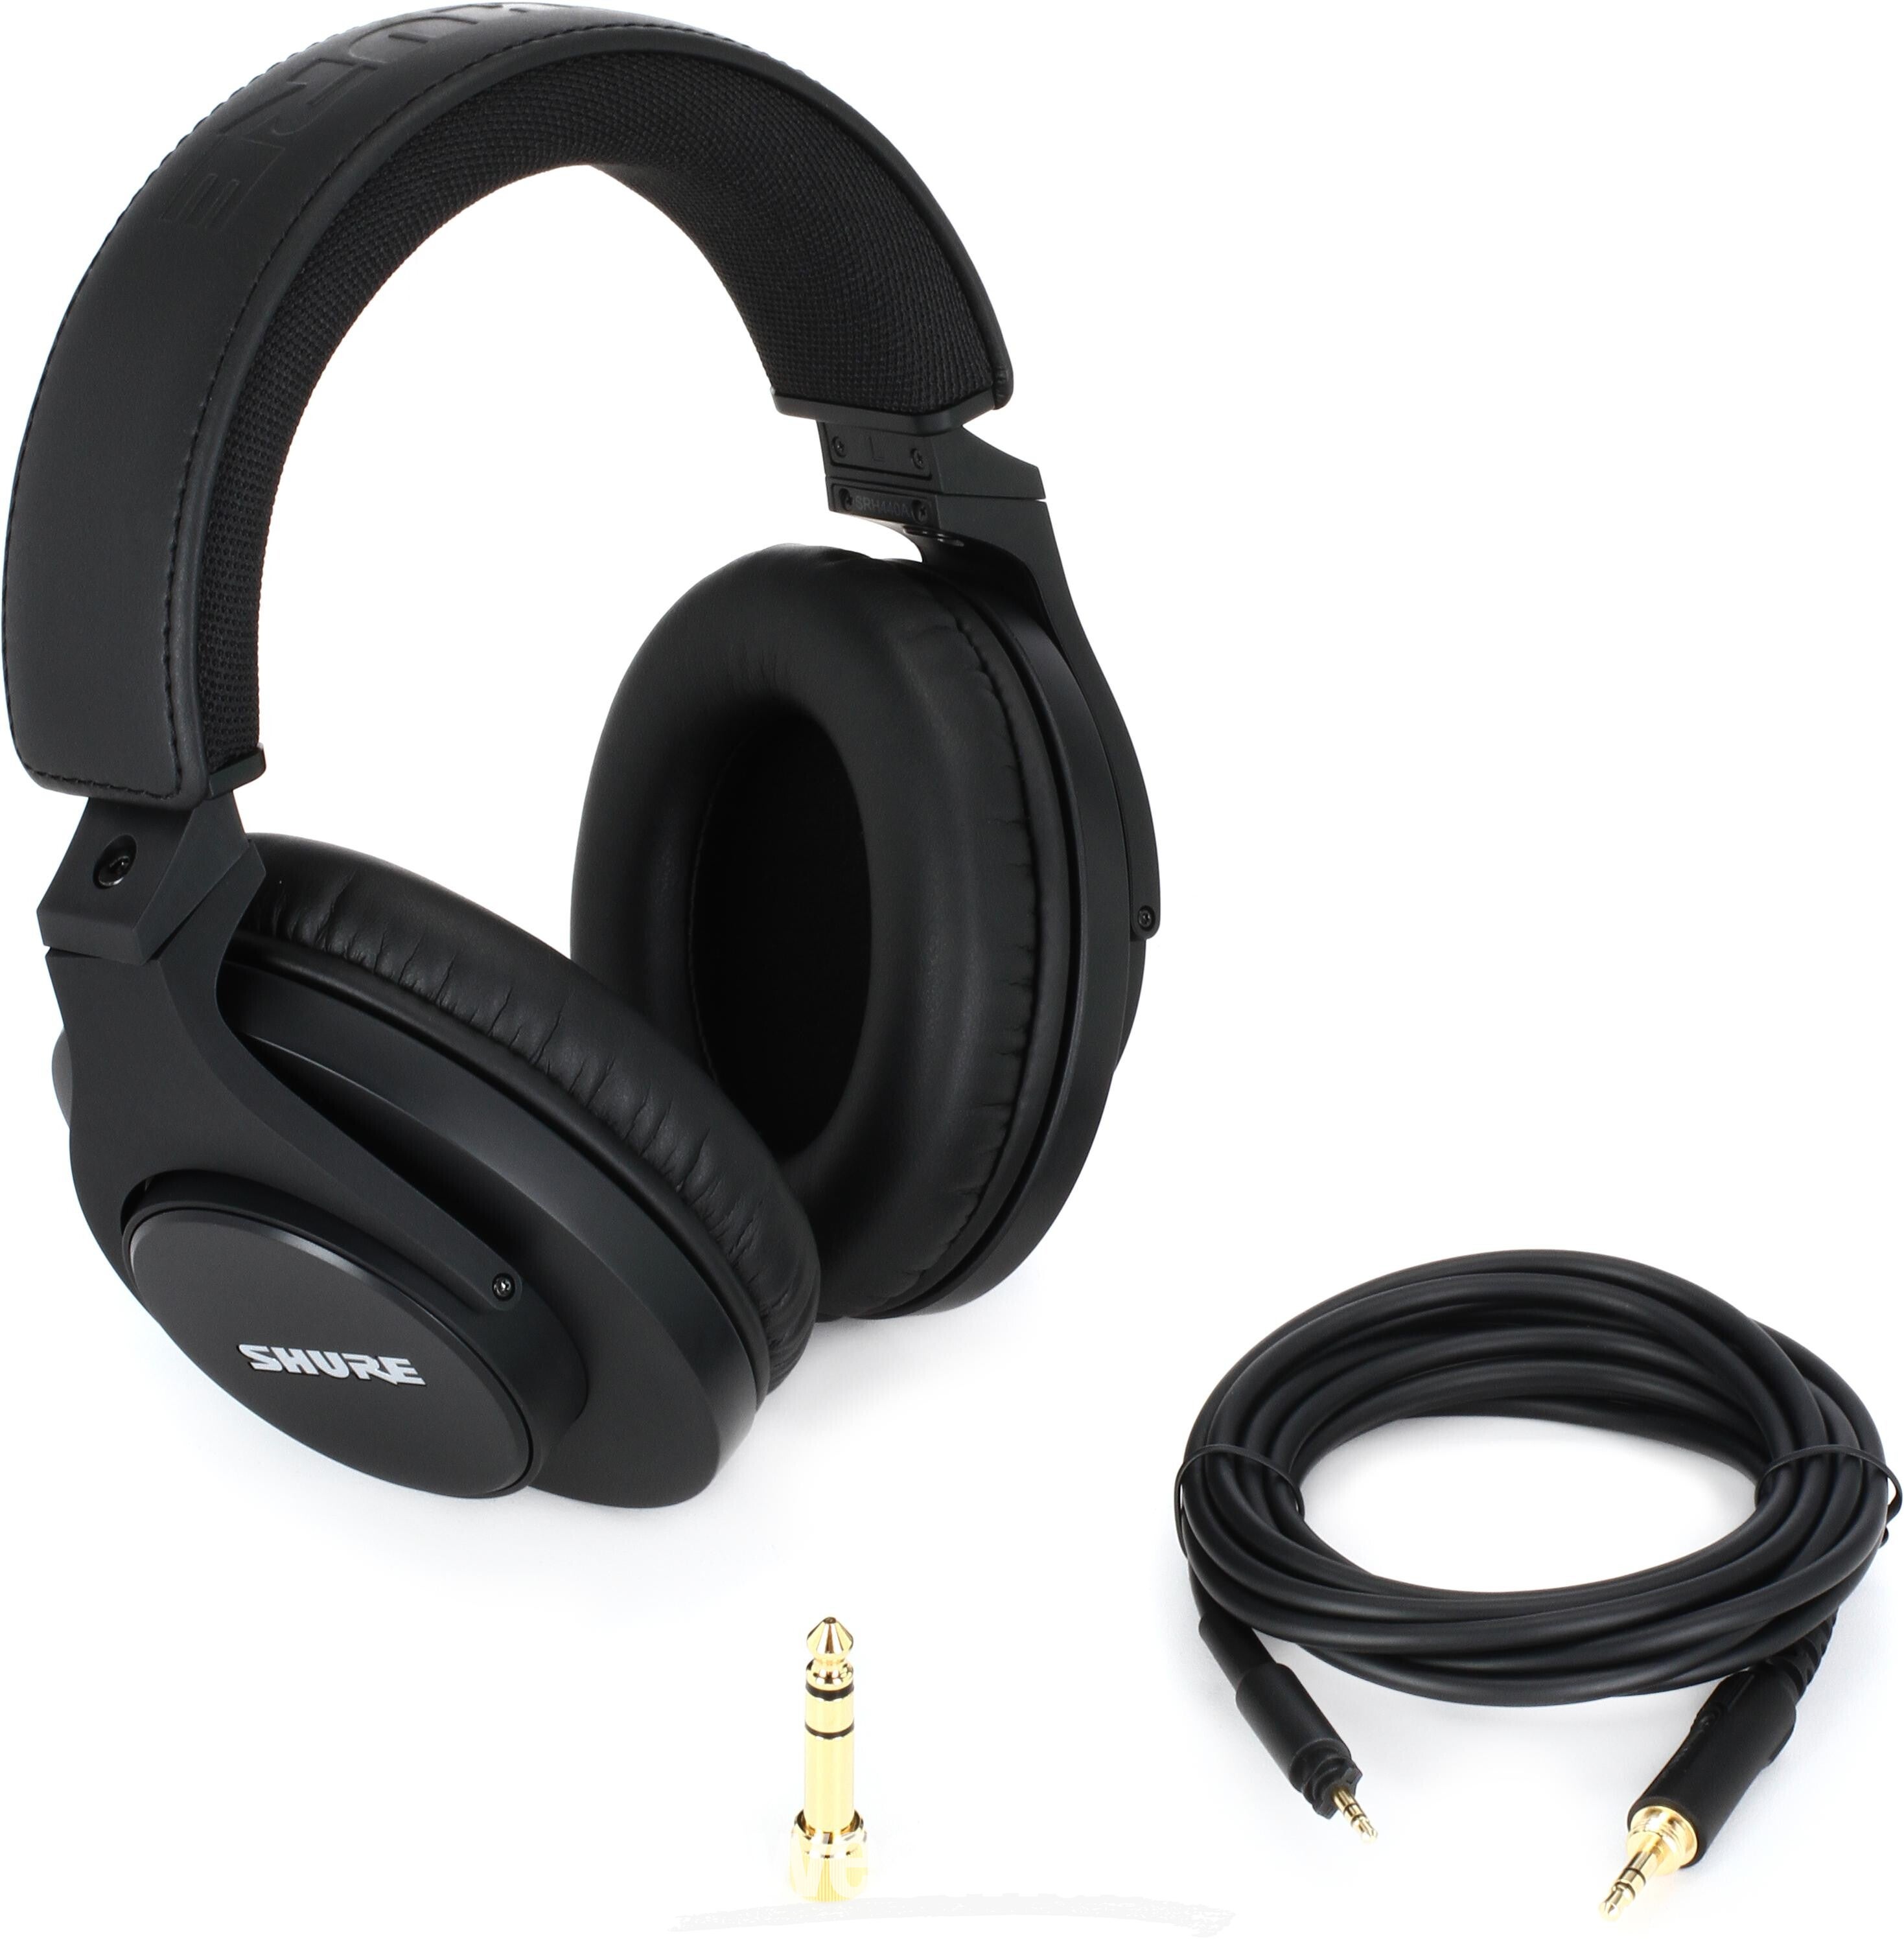 Shure SRH440A Closed-back Studio Headphones Reviews | Sweetwater